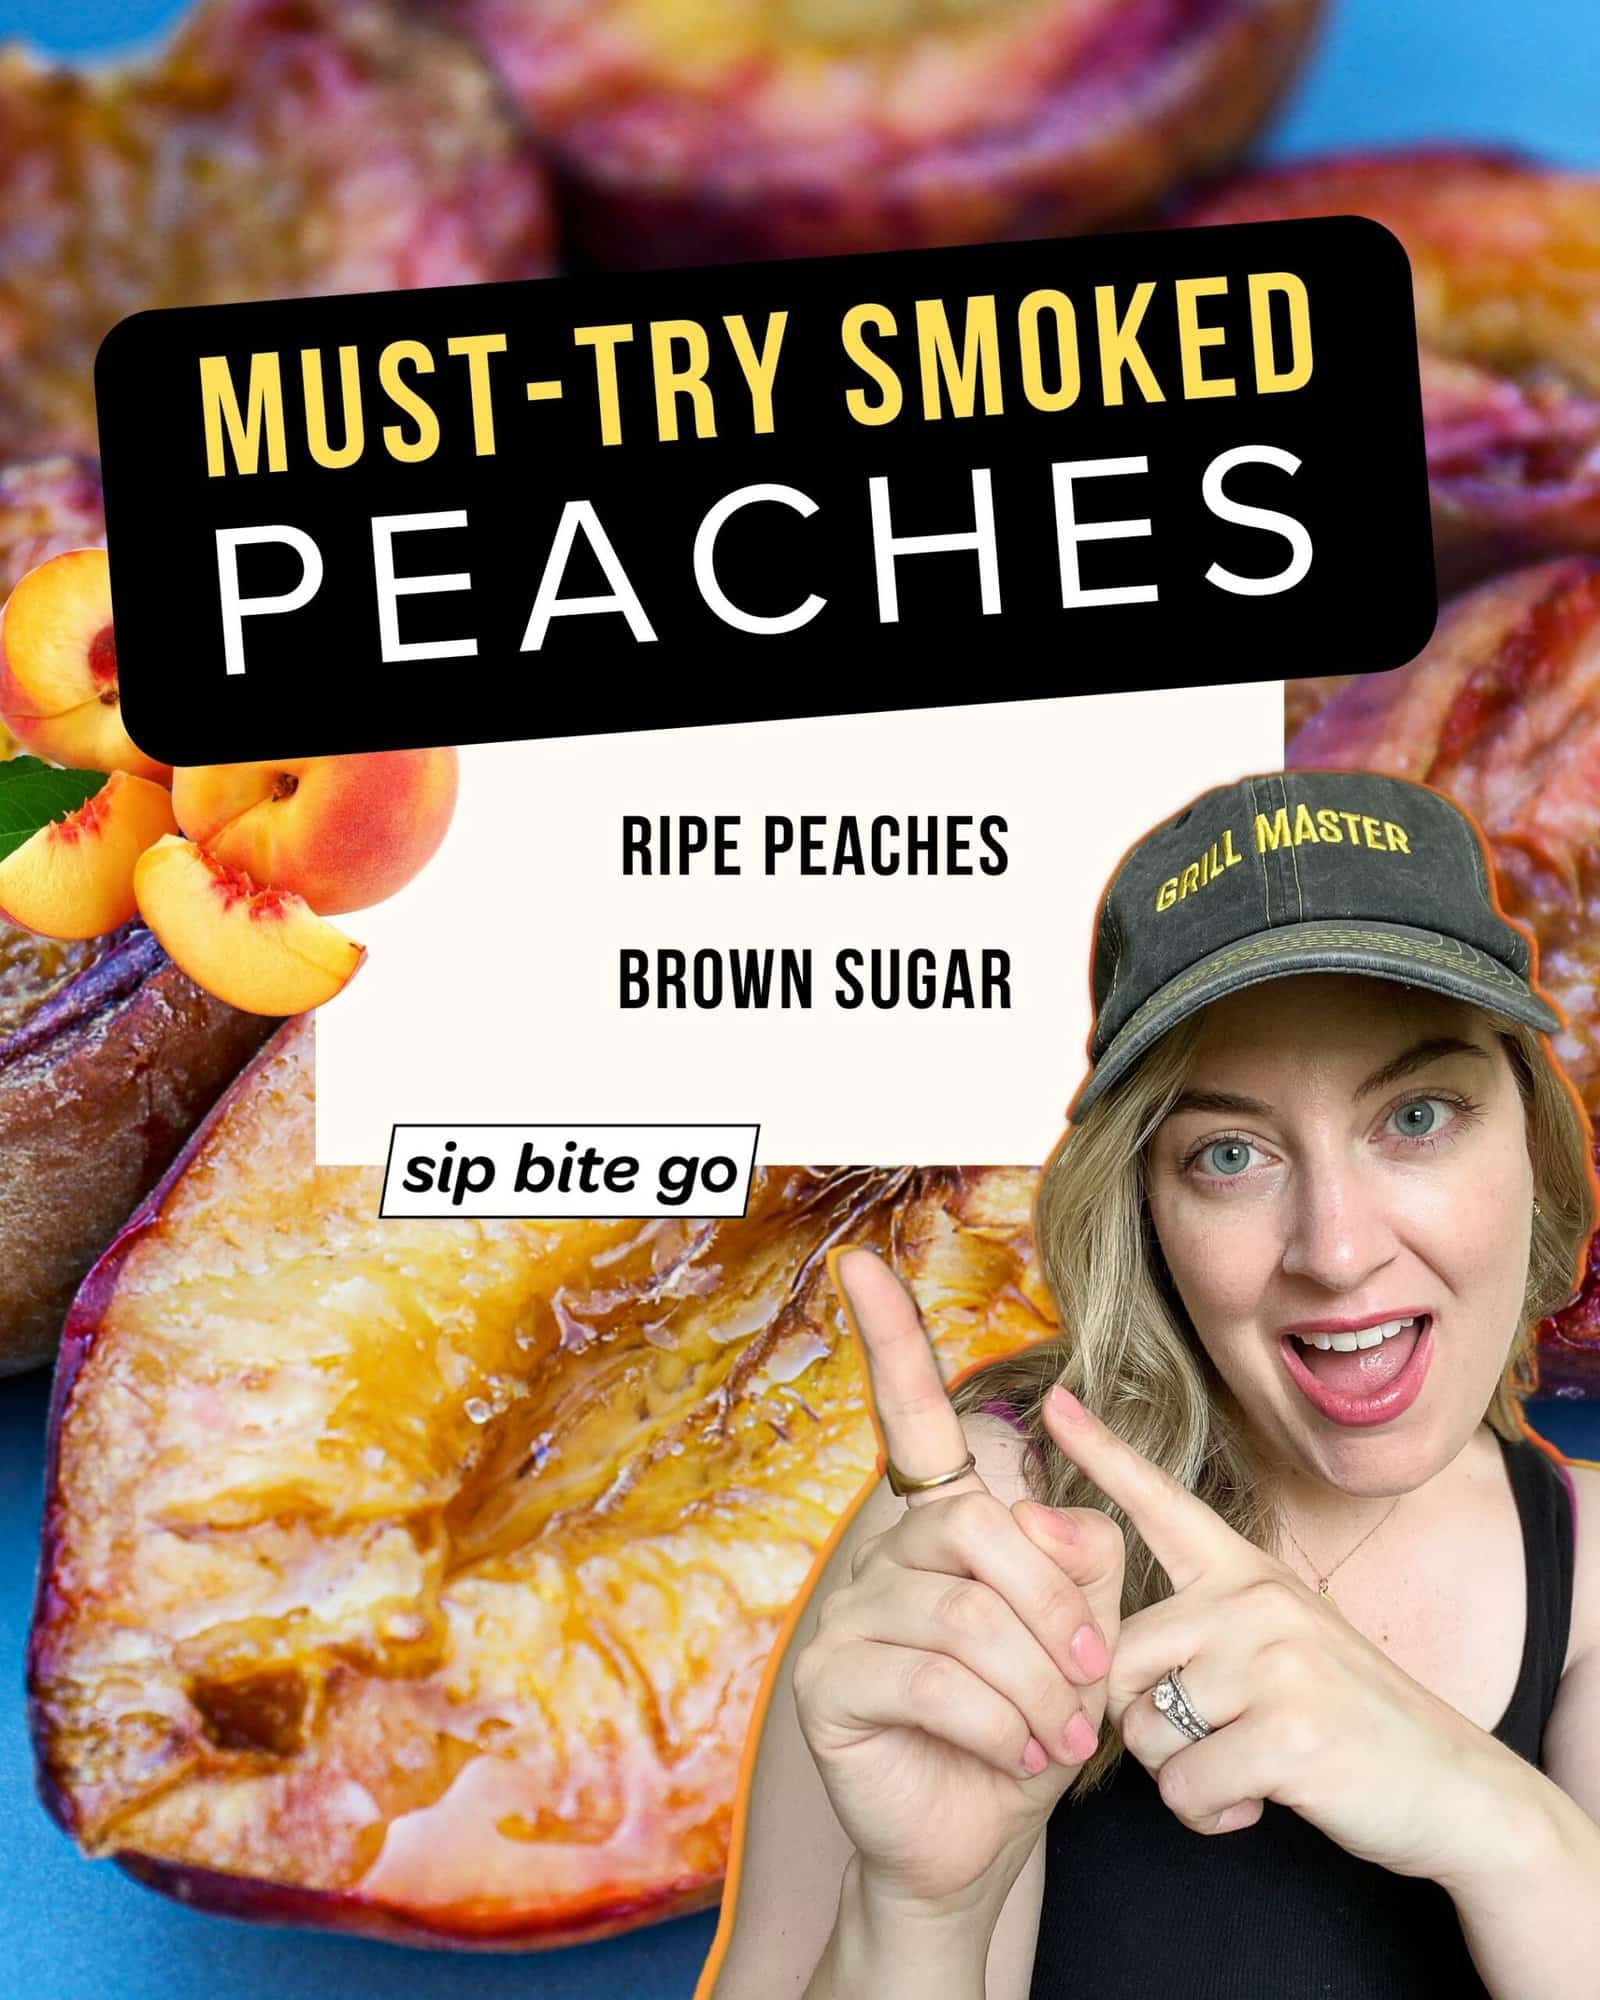 Infographic with list of ingredients for smoking peaches on the traeger pellet grill